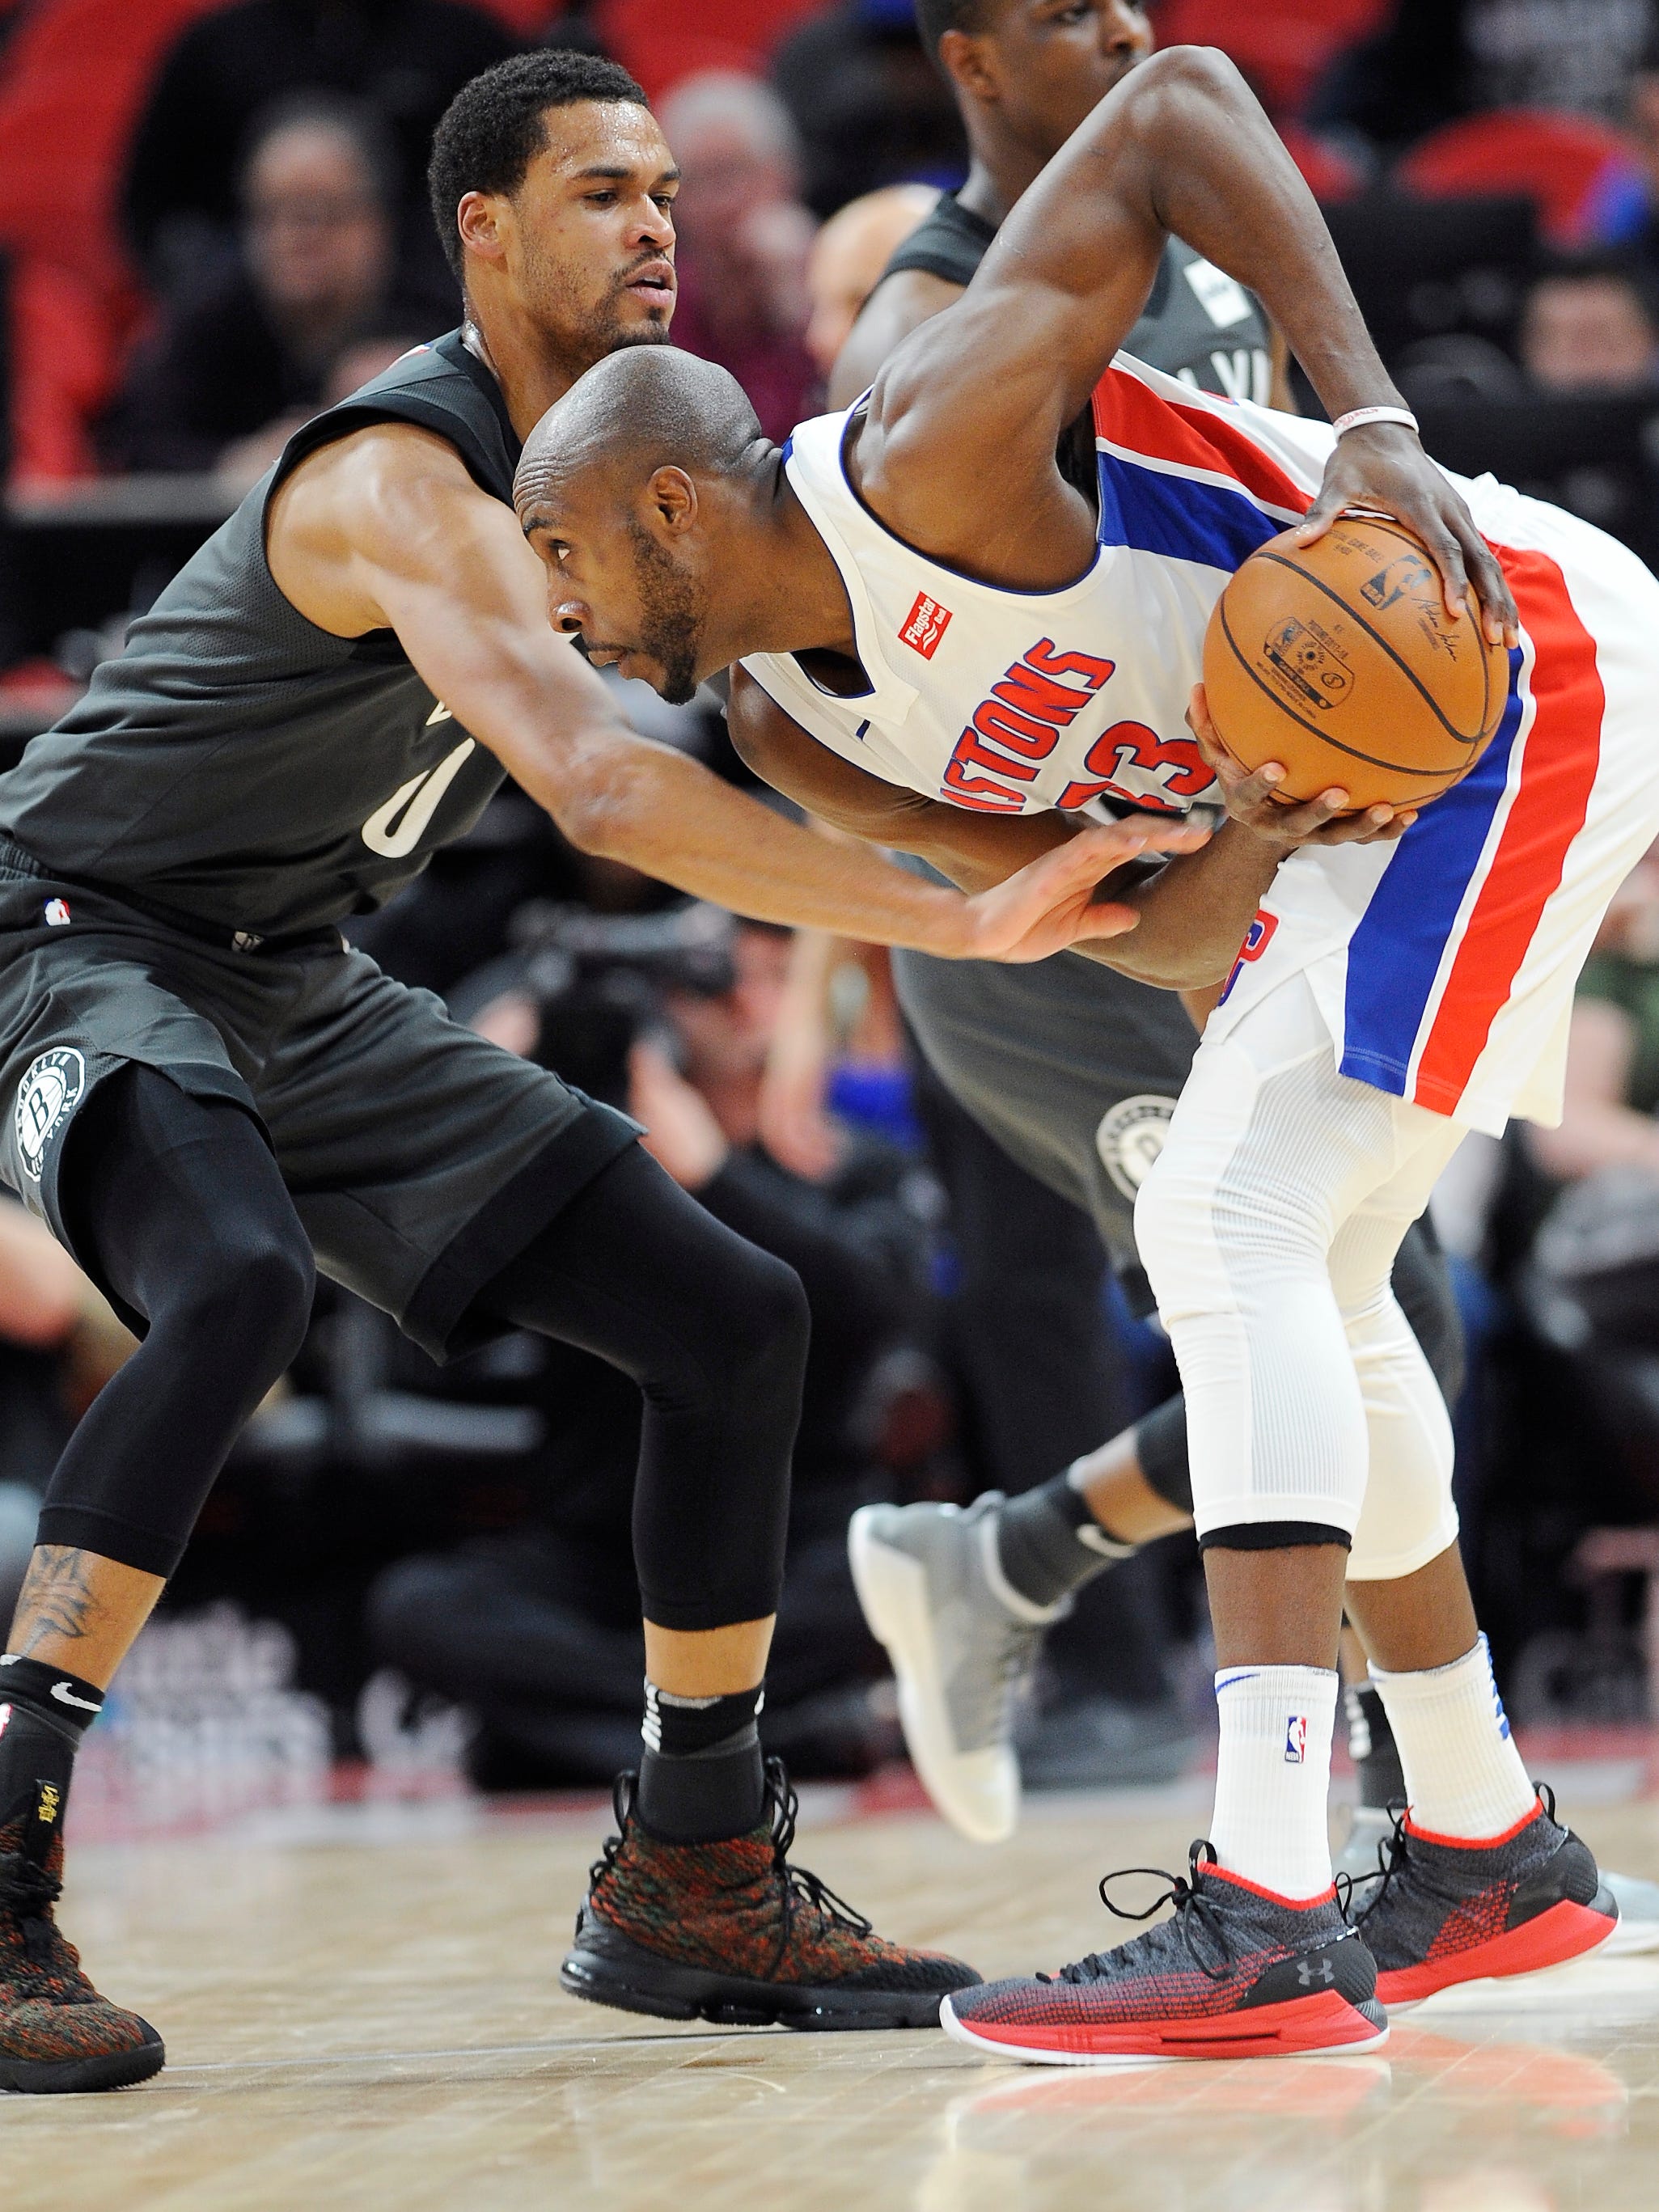 Pistons' Anthony Tolliver looks for room around Nets' James Webb III in the second quarter.